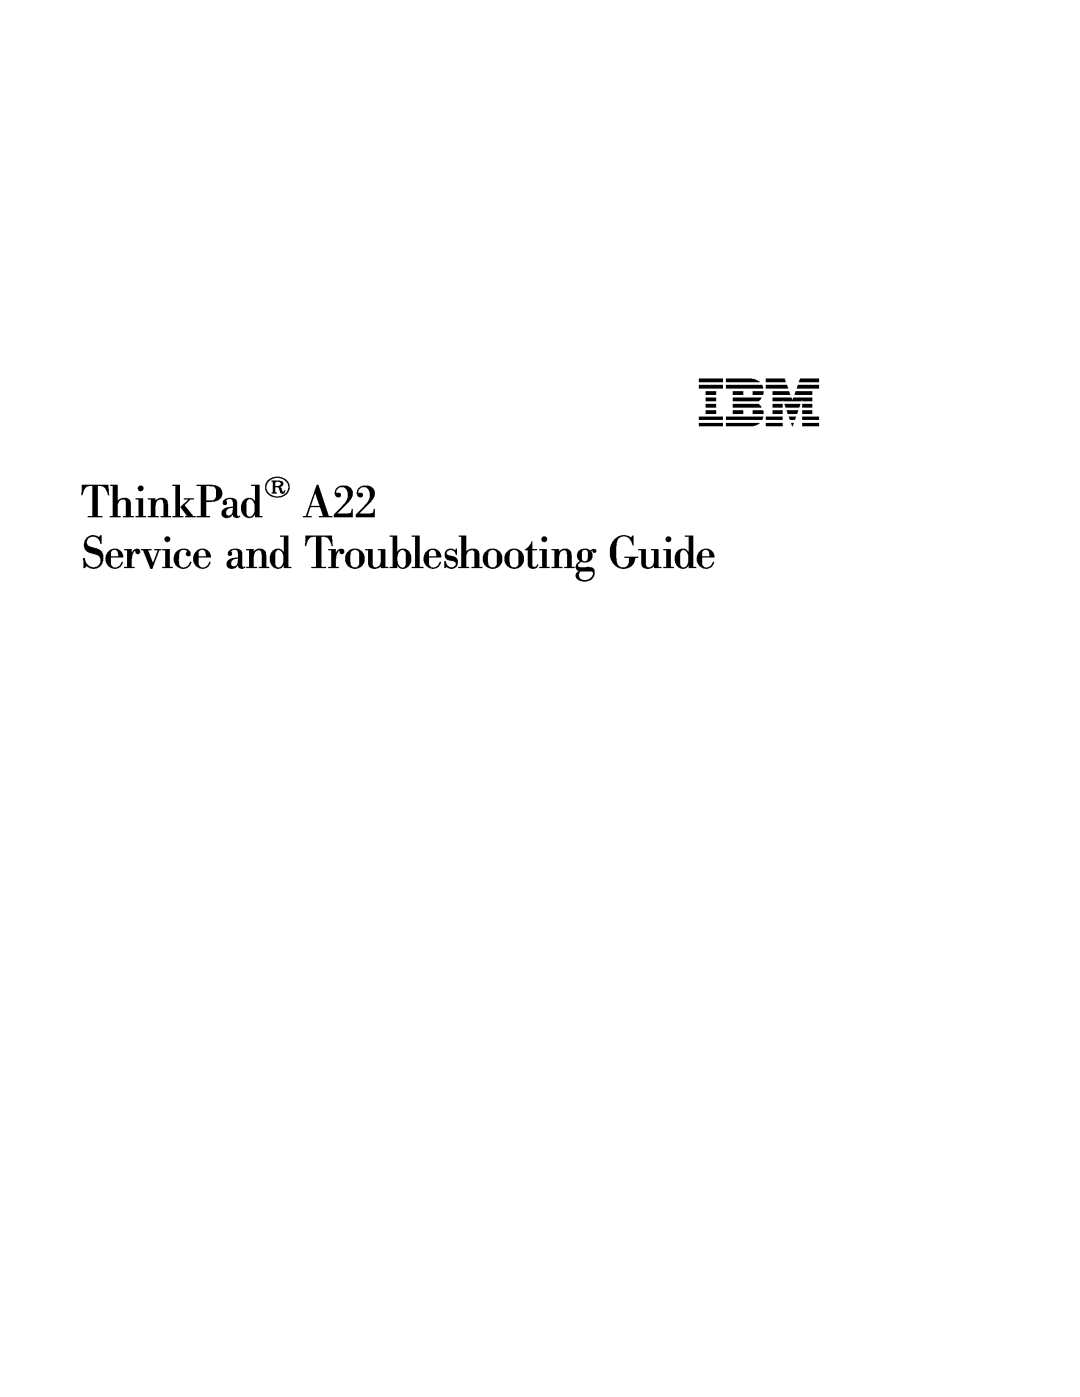 IBM manual ThinkPad A22 Service and Troubleshooting Guide 